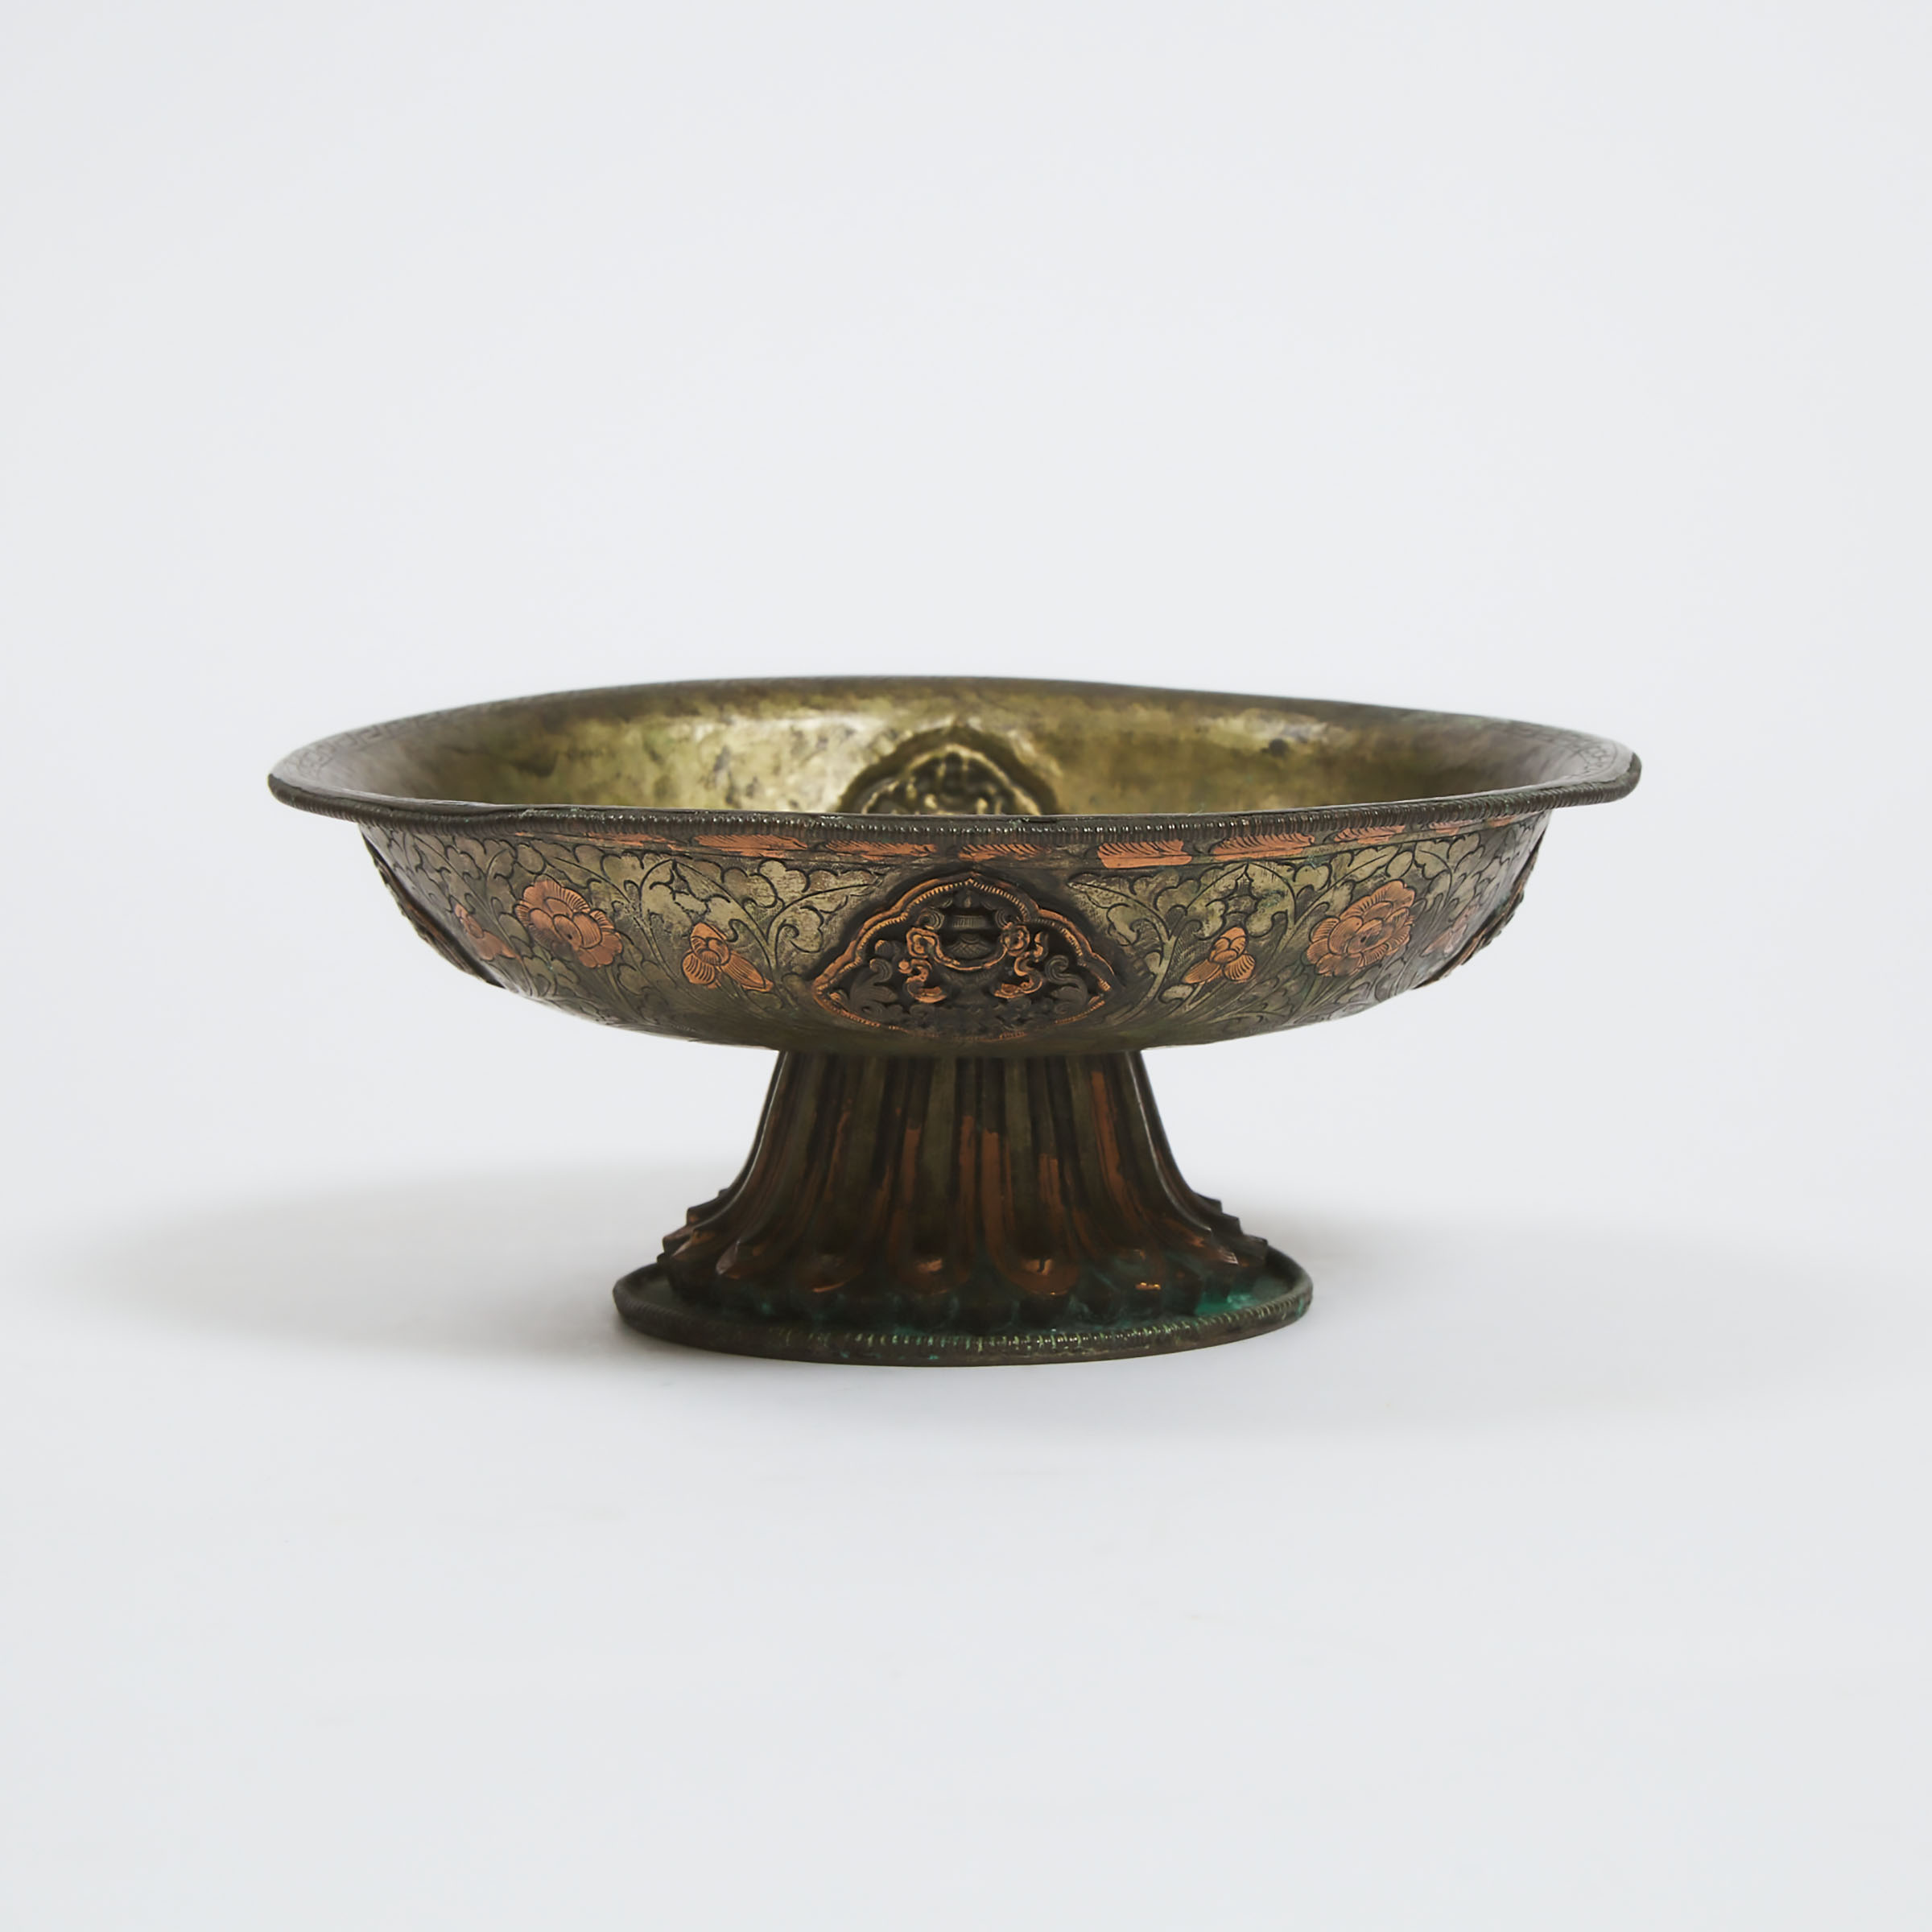 A Tibetan Copper Footed Dish, 11th